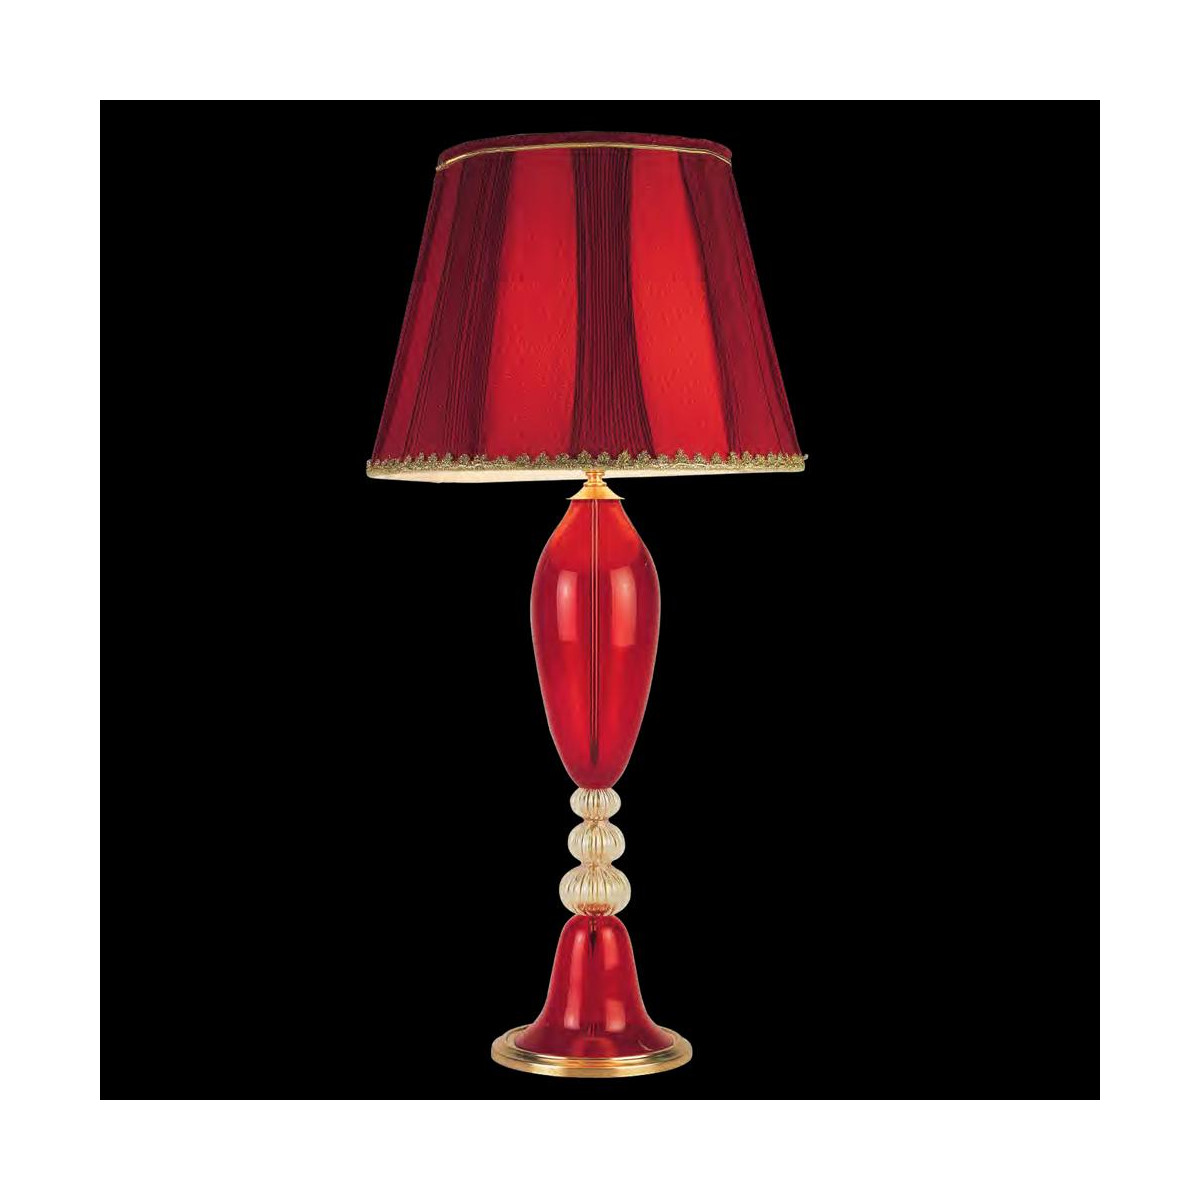 "Euridice" Murano glass table lamp - red and gold- large